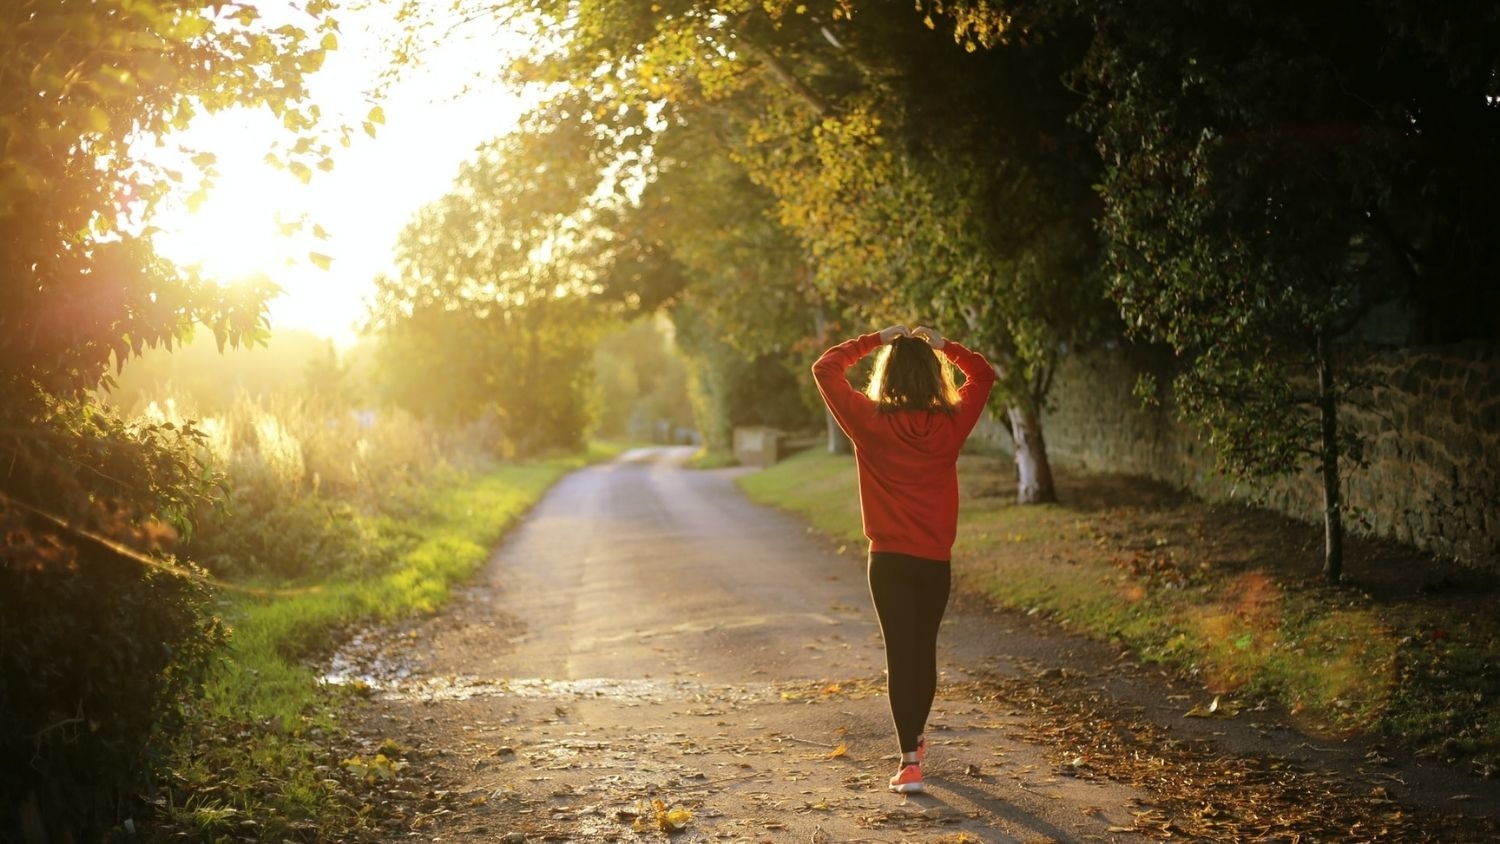 A person goes for a jog in the morning - Study Finds Risk Factors Linked to COVID-19 Mental Health Impacts for College Students - Parks, Recreation and Tourism Management at NC State University